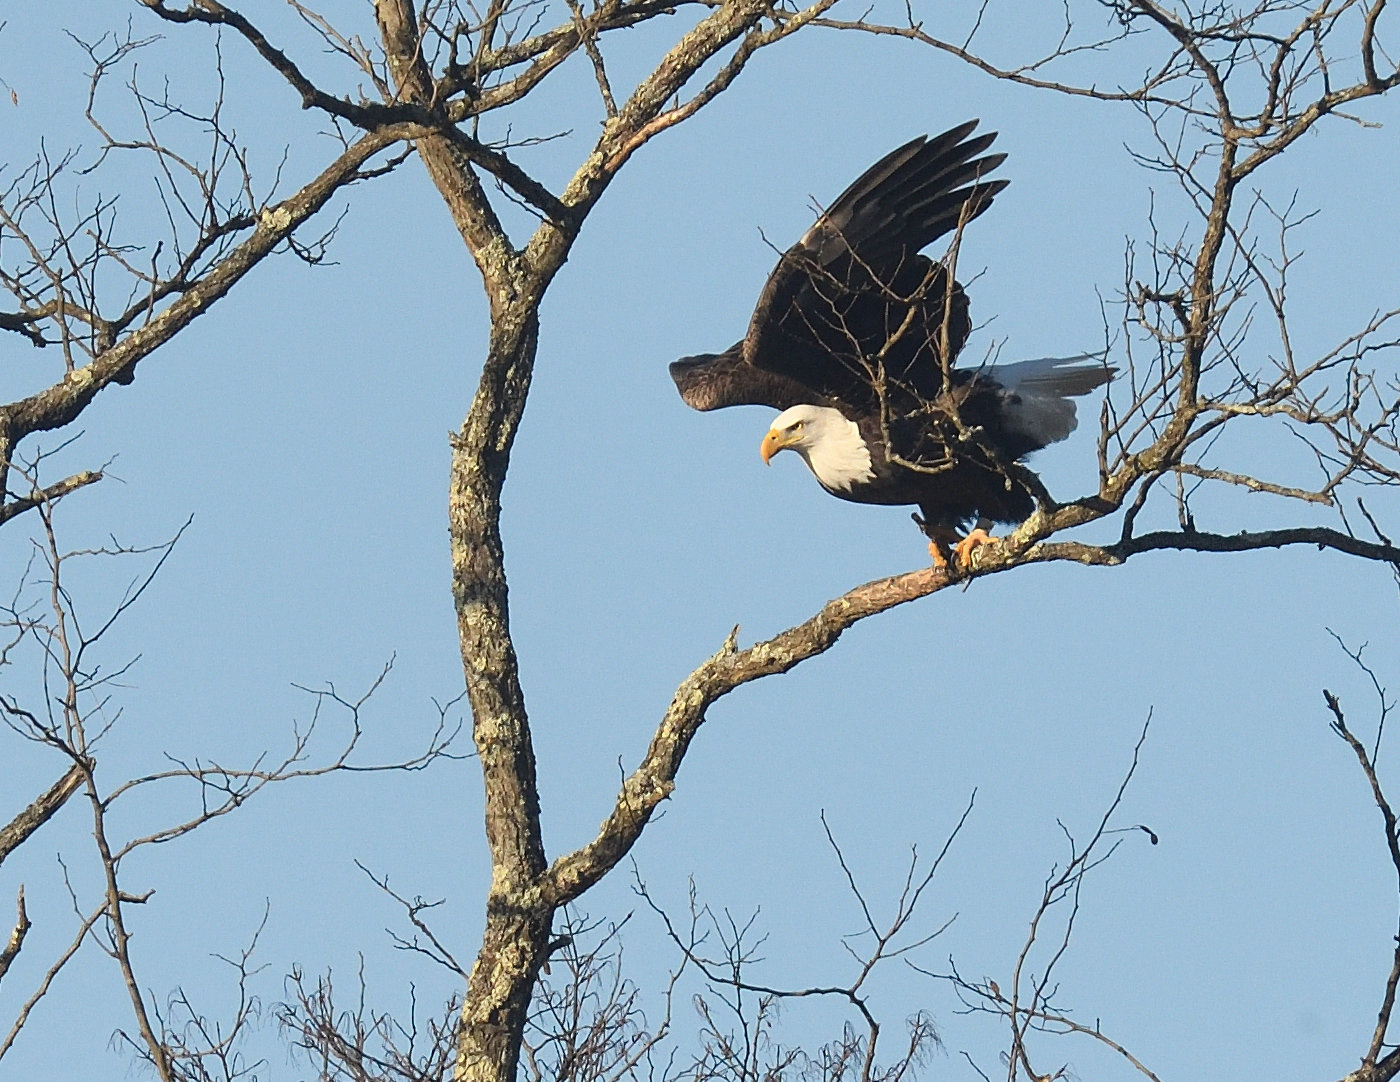 The eagle is now extending its legs, akin to a person trying to jump off the ground. At the same time, its wings are extended for the first wing flap. An eagle needs some horizontal space to take off. (If you see an eagle along a road eating carrion, drive slow; it may not be able to get high enough to clear moving vehicles if it flushes and flies across the road).